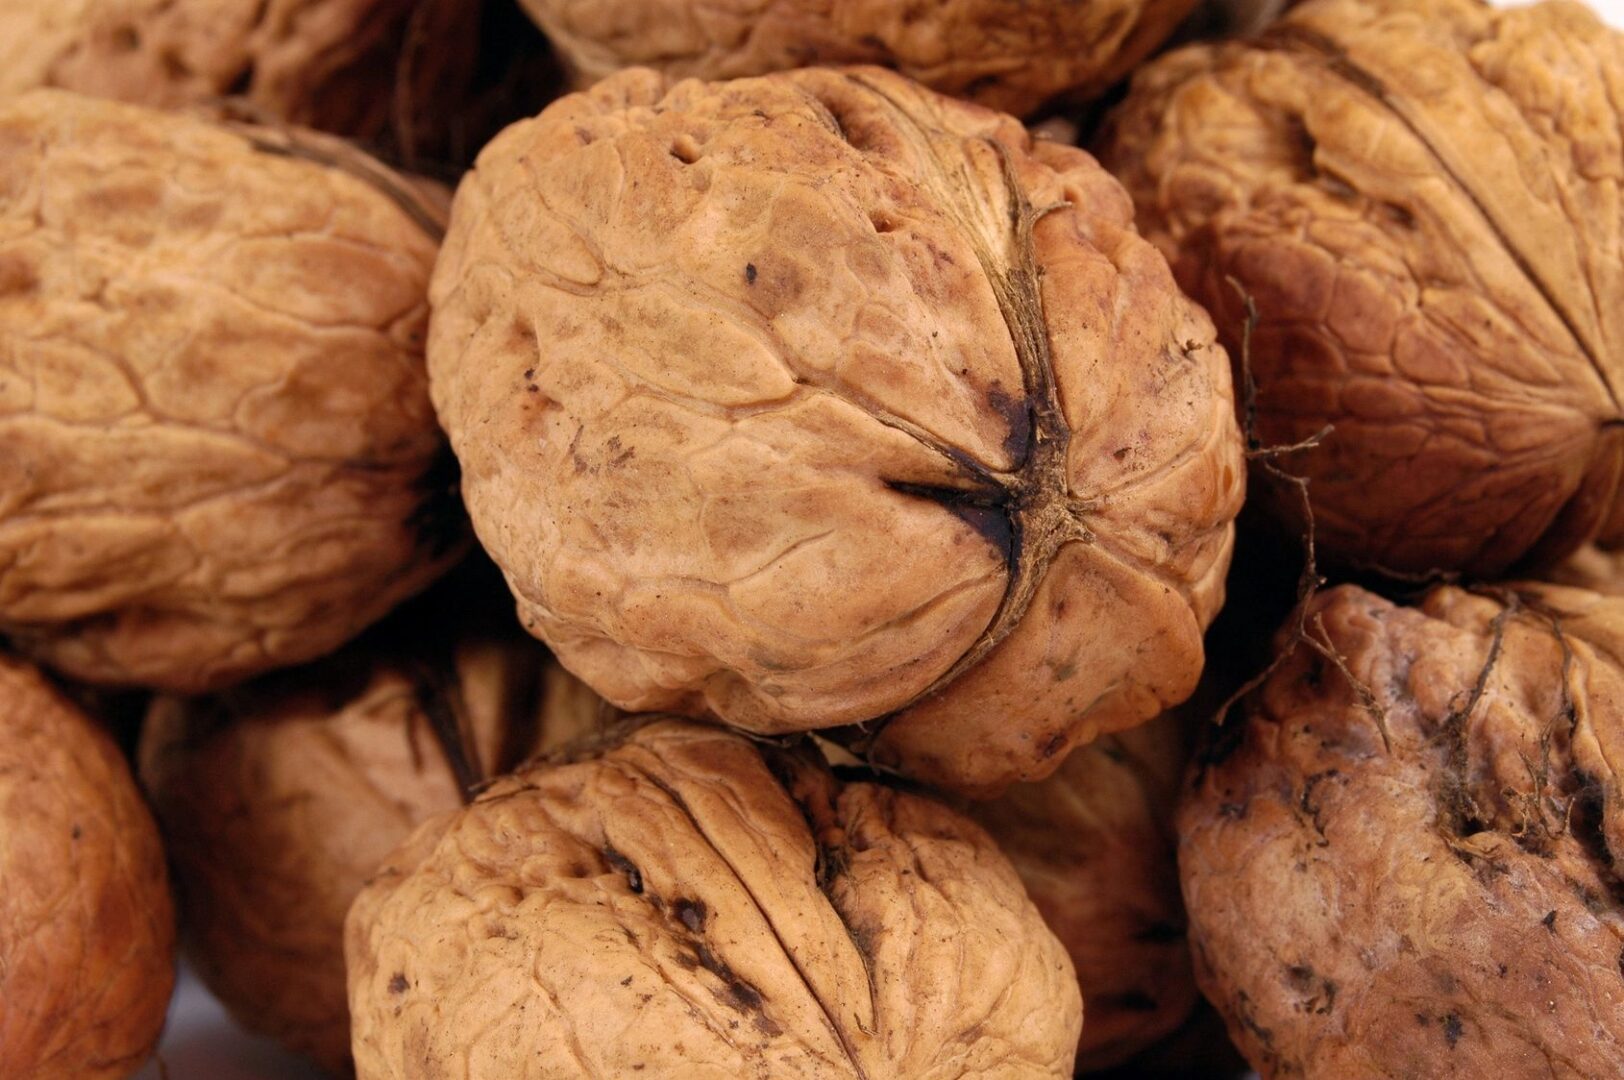 A pile of walnuts sitting on top of each other.